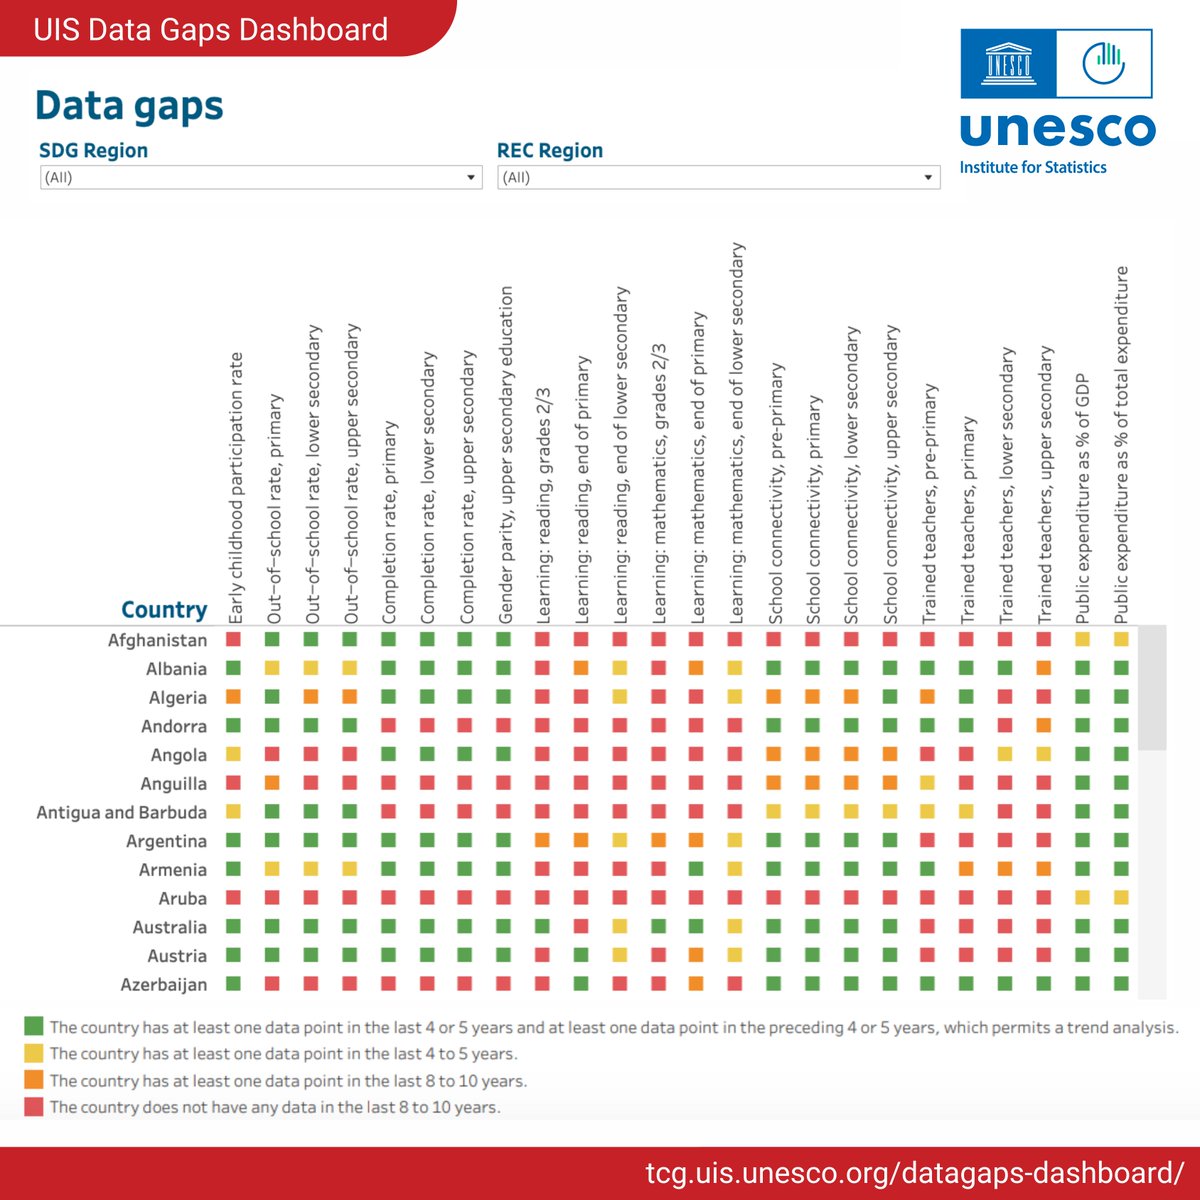 Bridging #datagaps is essential for informed policymaking 🌍 The #UIS_UNESCO Data Gaps Dashboard shows the availability and lack of #data on #education indicators such as out-of-school rates, #learning outcomes, and more. Explore the dashboard ➡️ tcg.uis.unesco.org/datagaps-dashb…